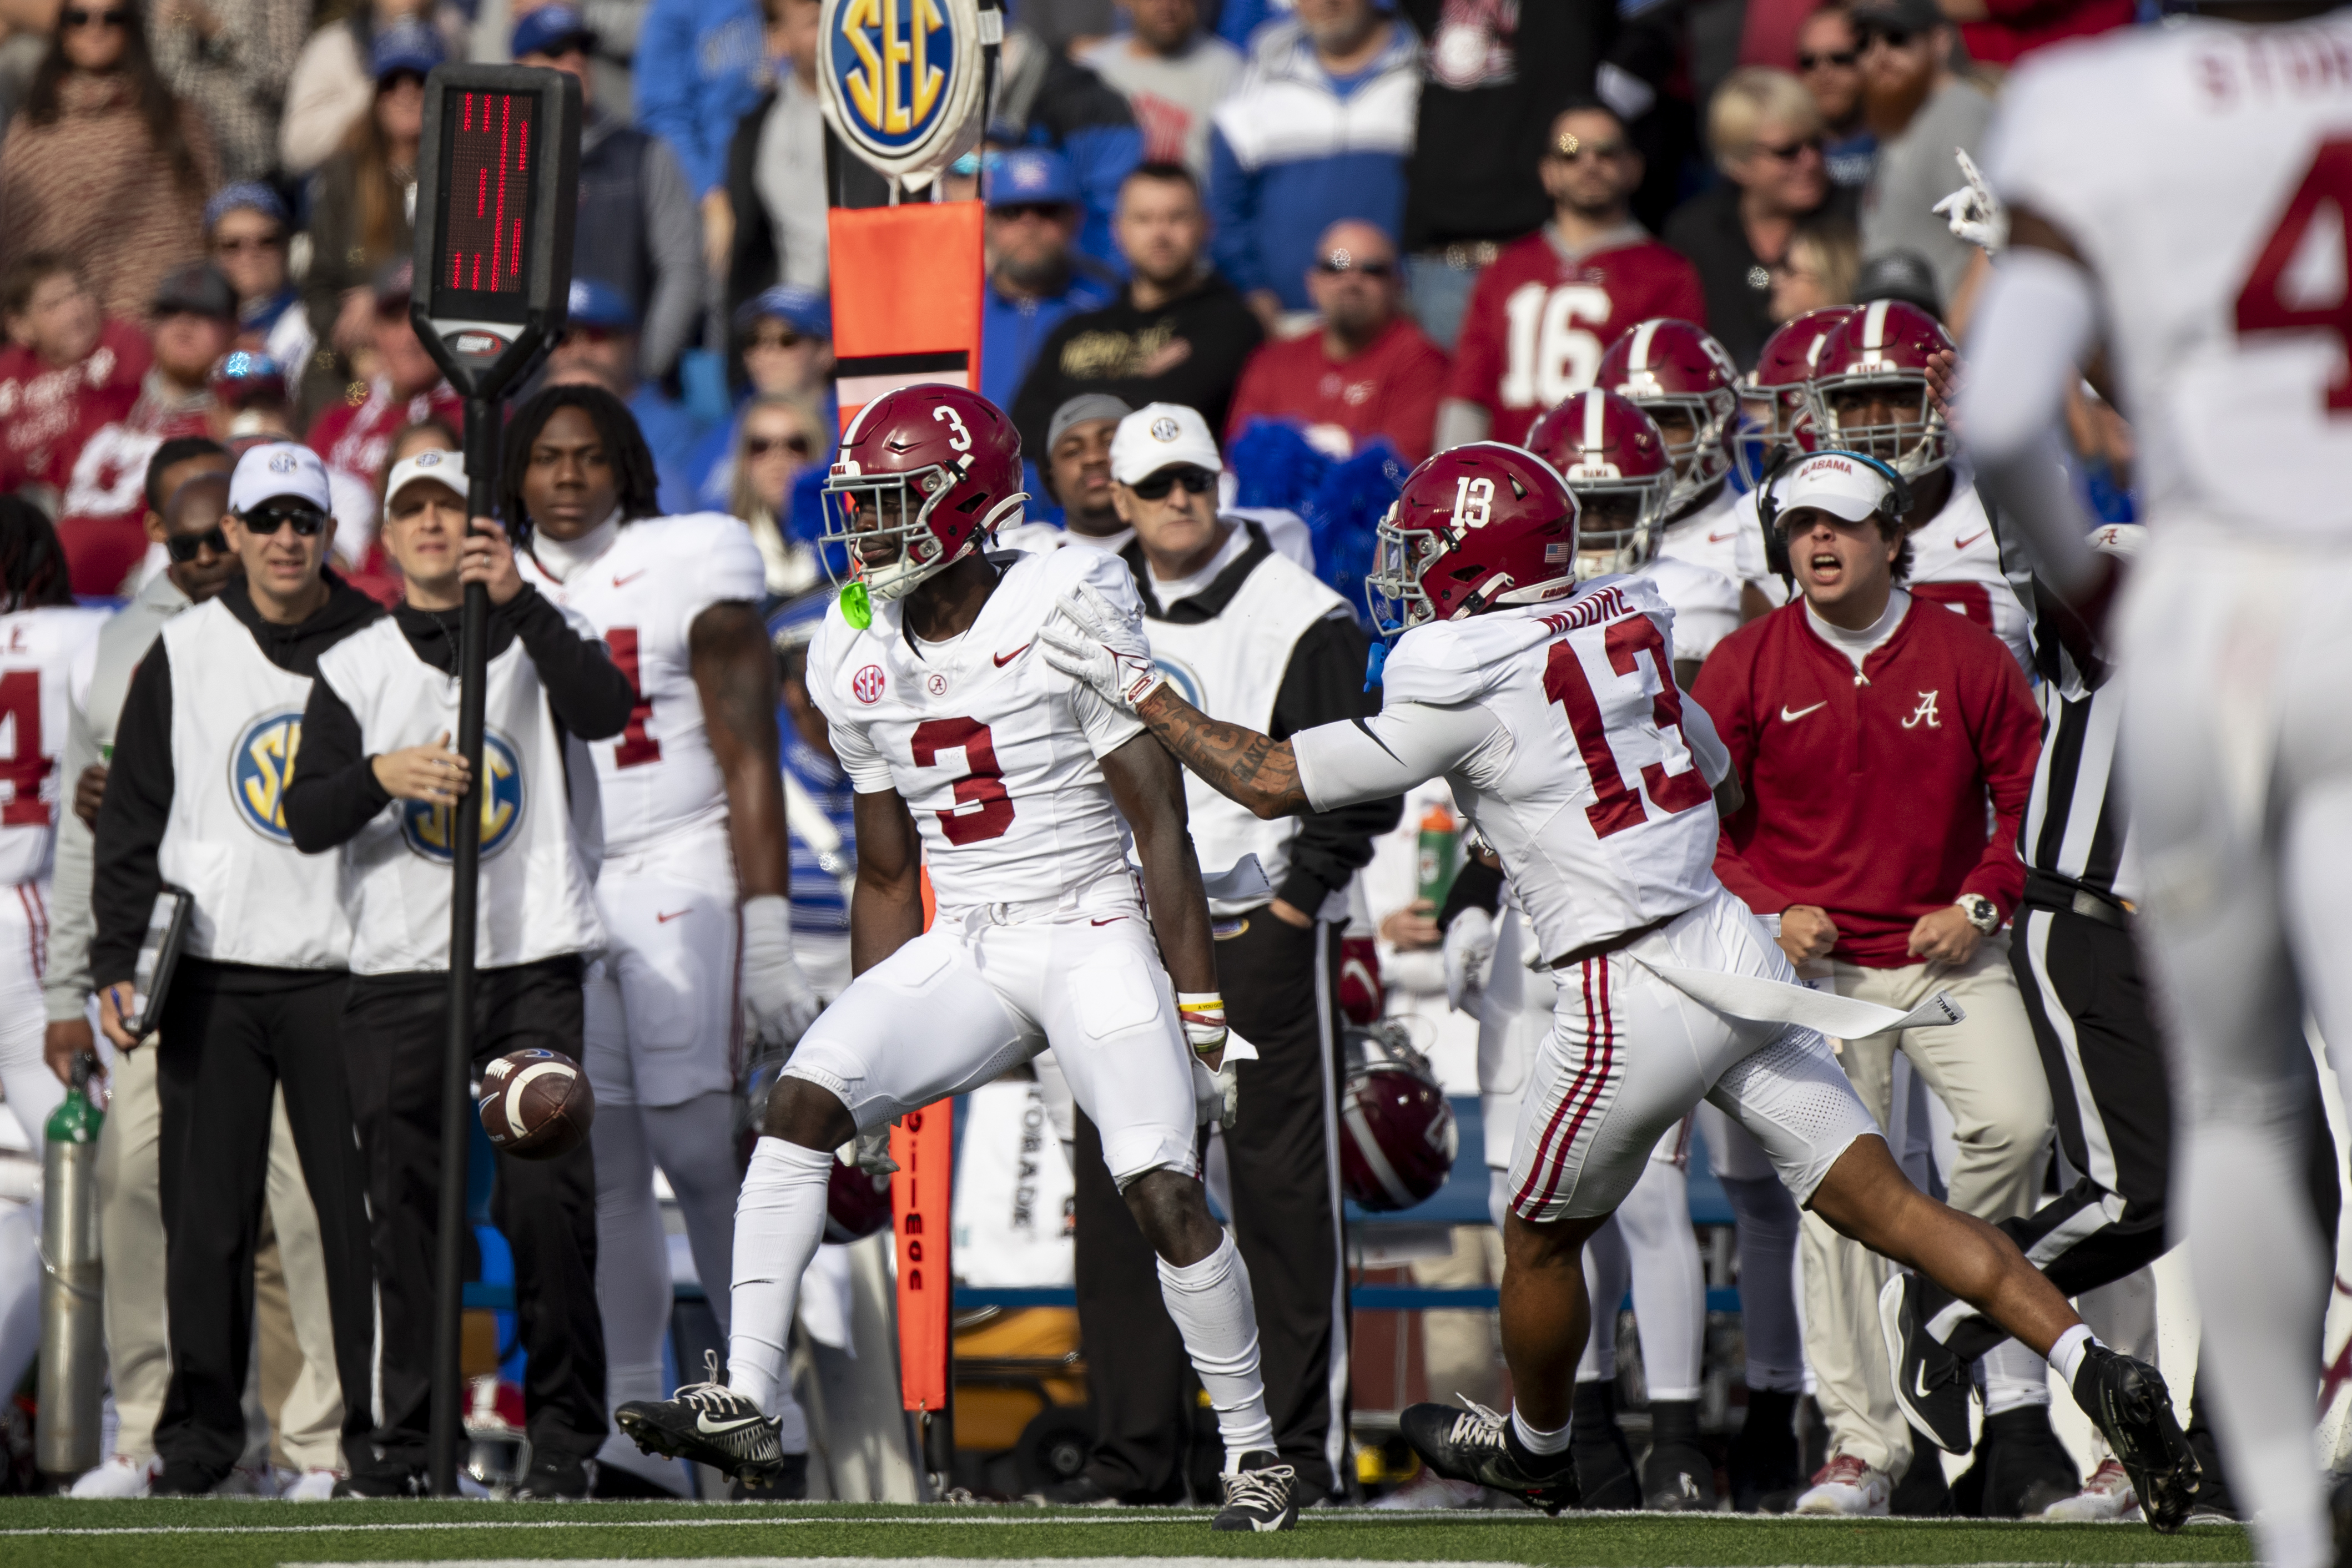 Alabama clinches the SEC West after 49-21 win over Kentucky